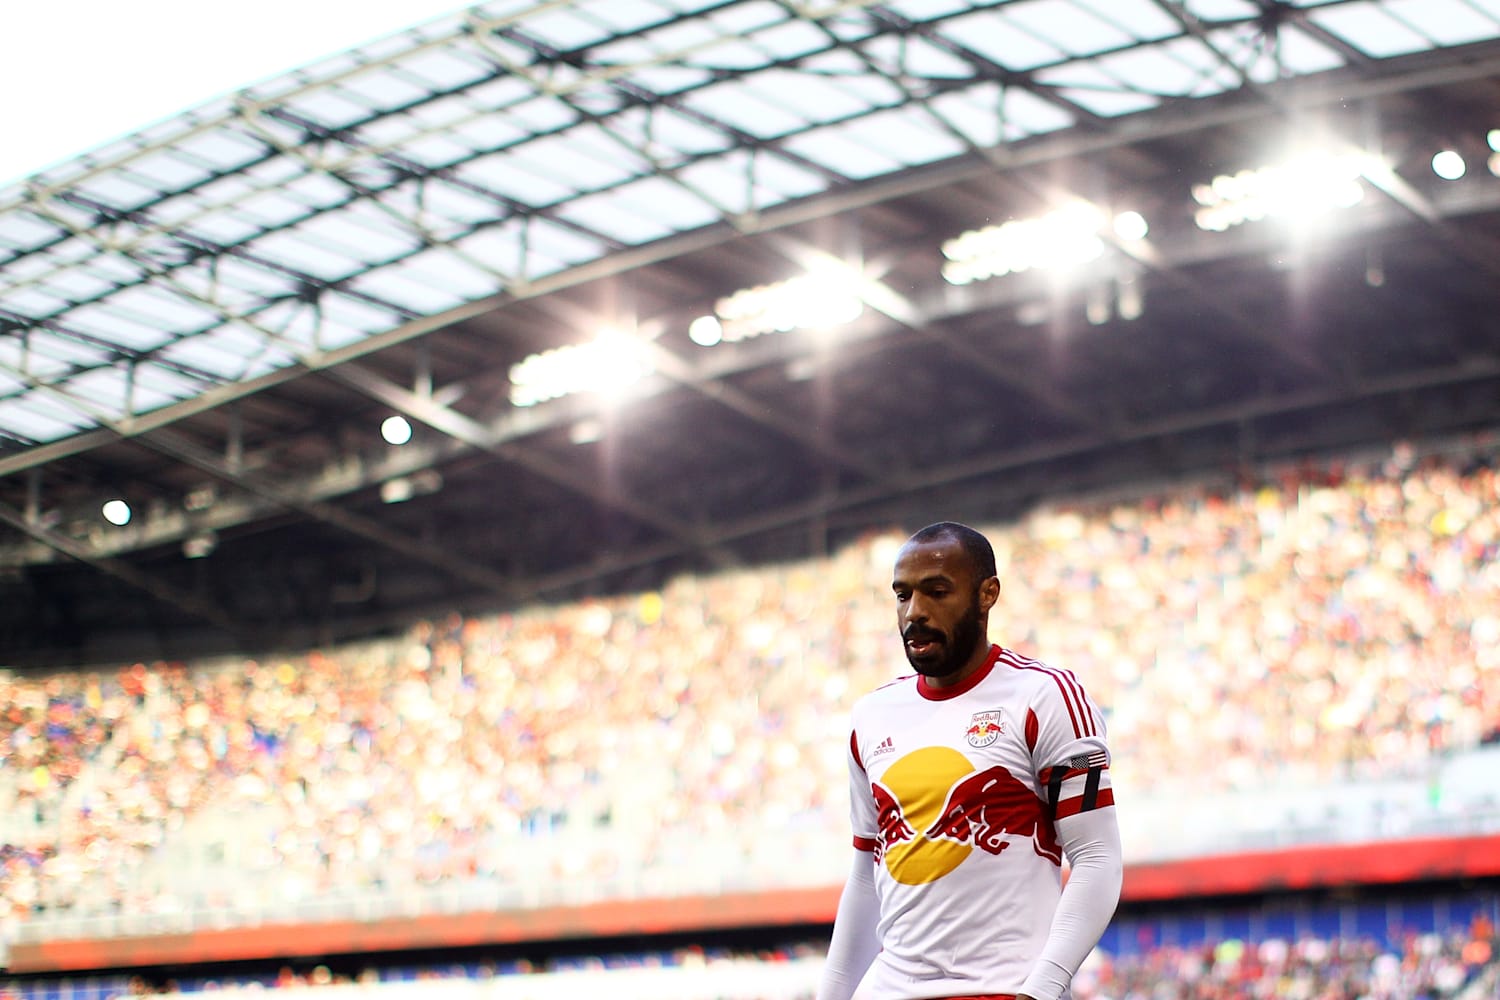 GOAL: Mistake in back for HOU makes it easy for Thierry Henry